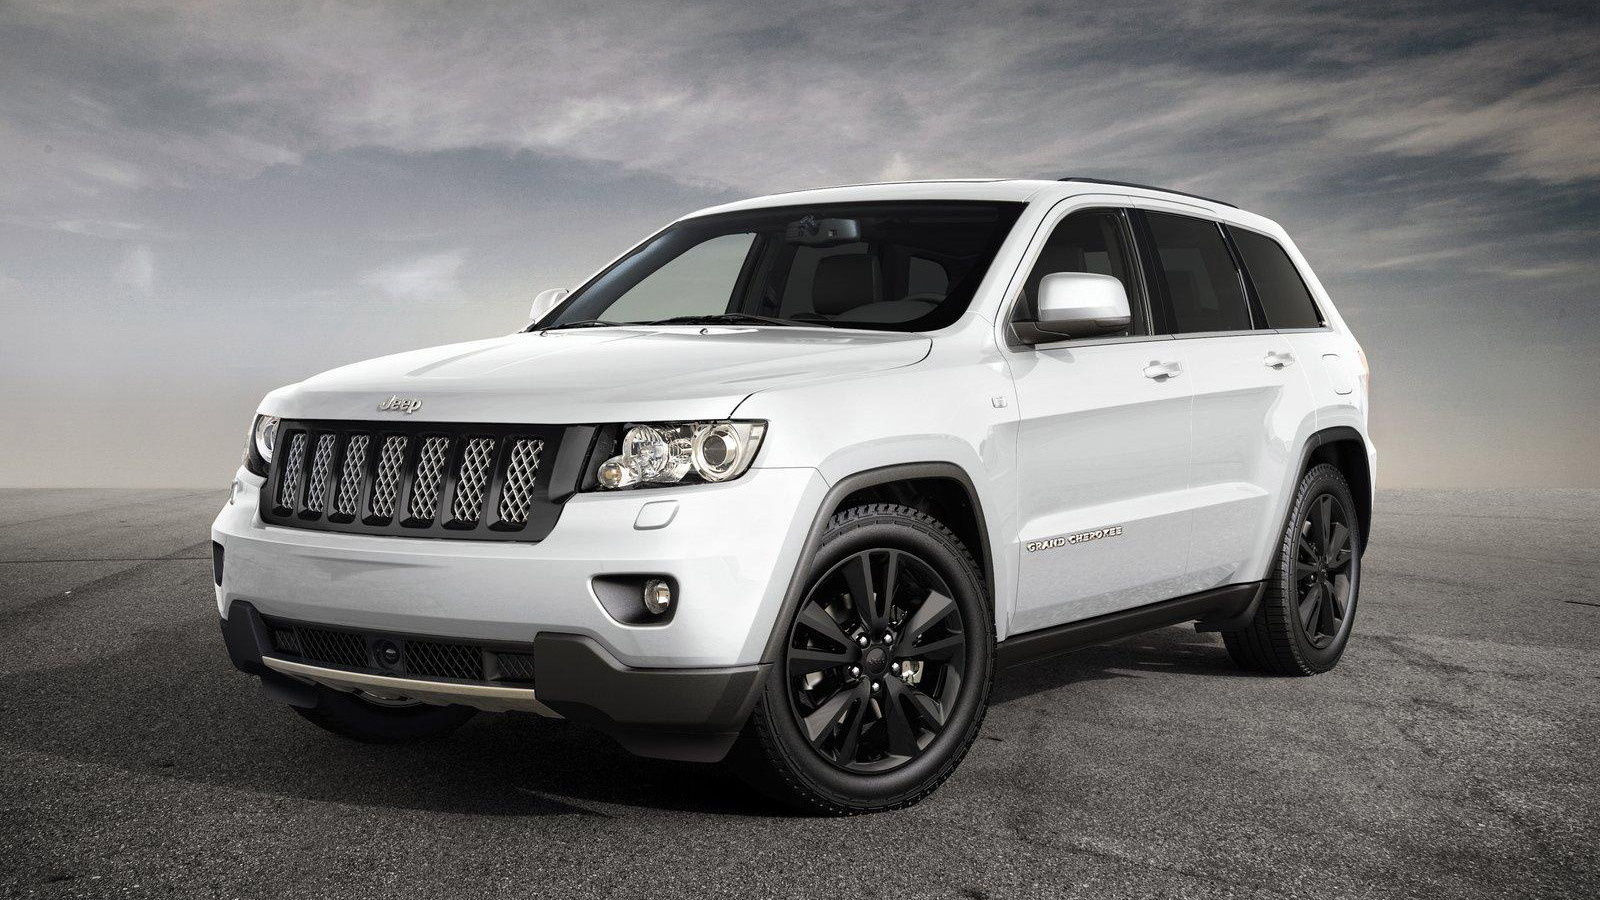 2012 Jeep Grand Cherokee production-intent sports concept